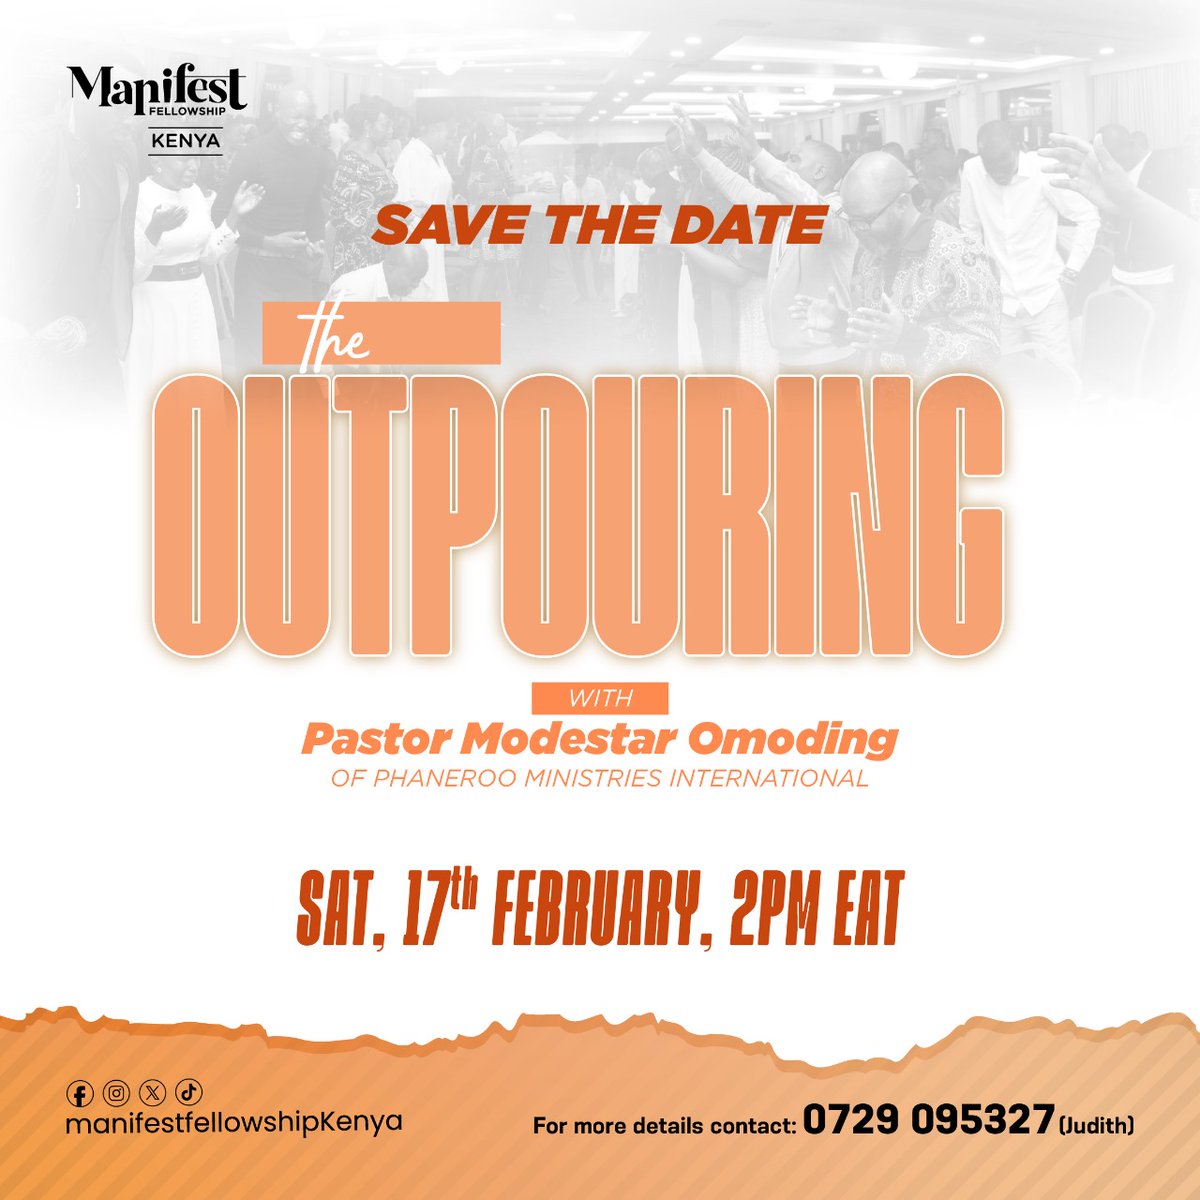 📅Save the Date.

17th February | 2pm EAT

#TheOutpouring
#BringAFriend